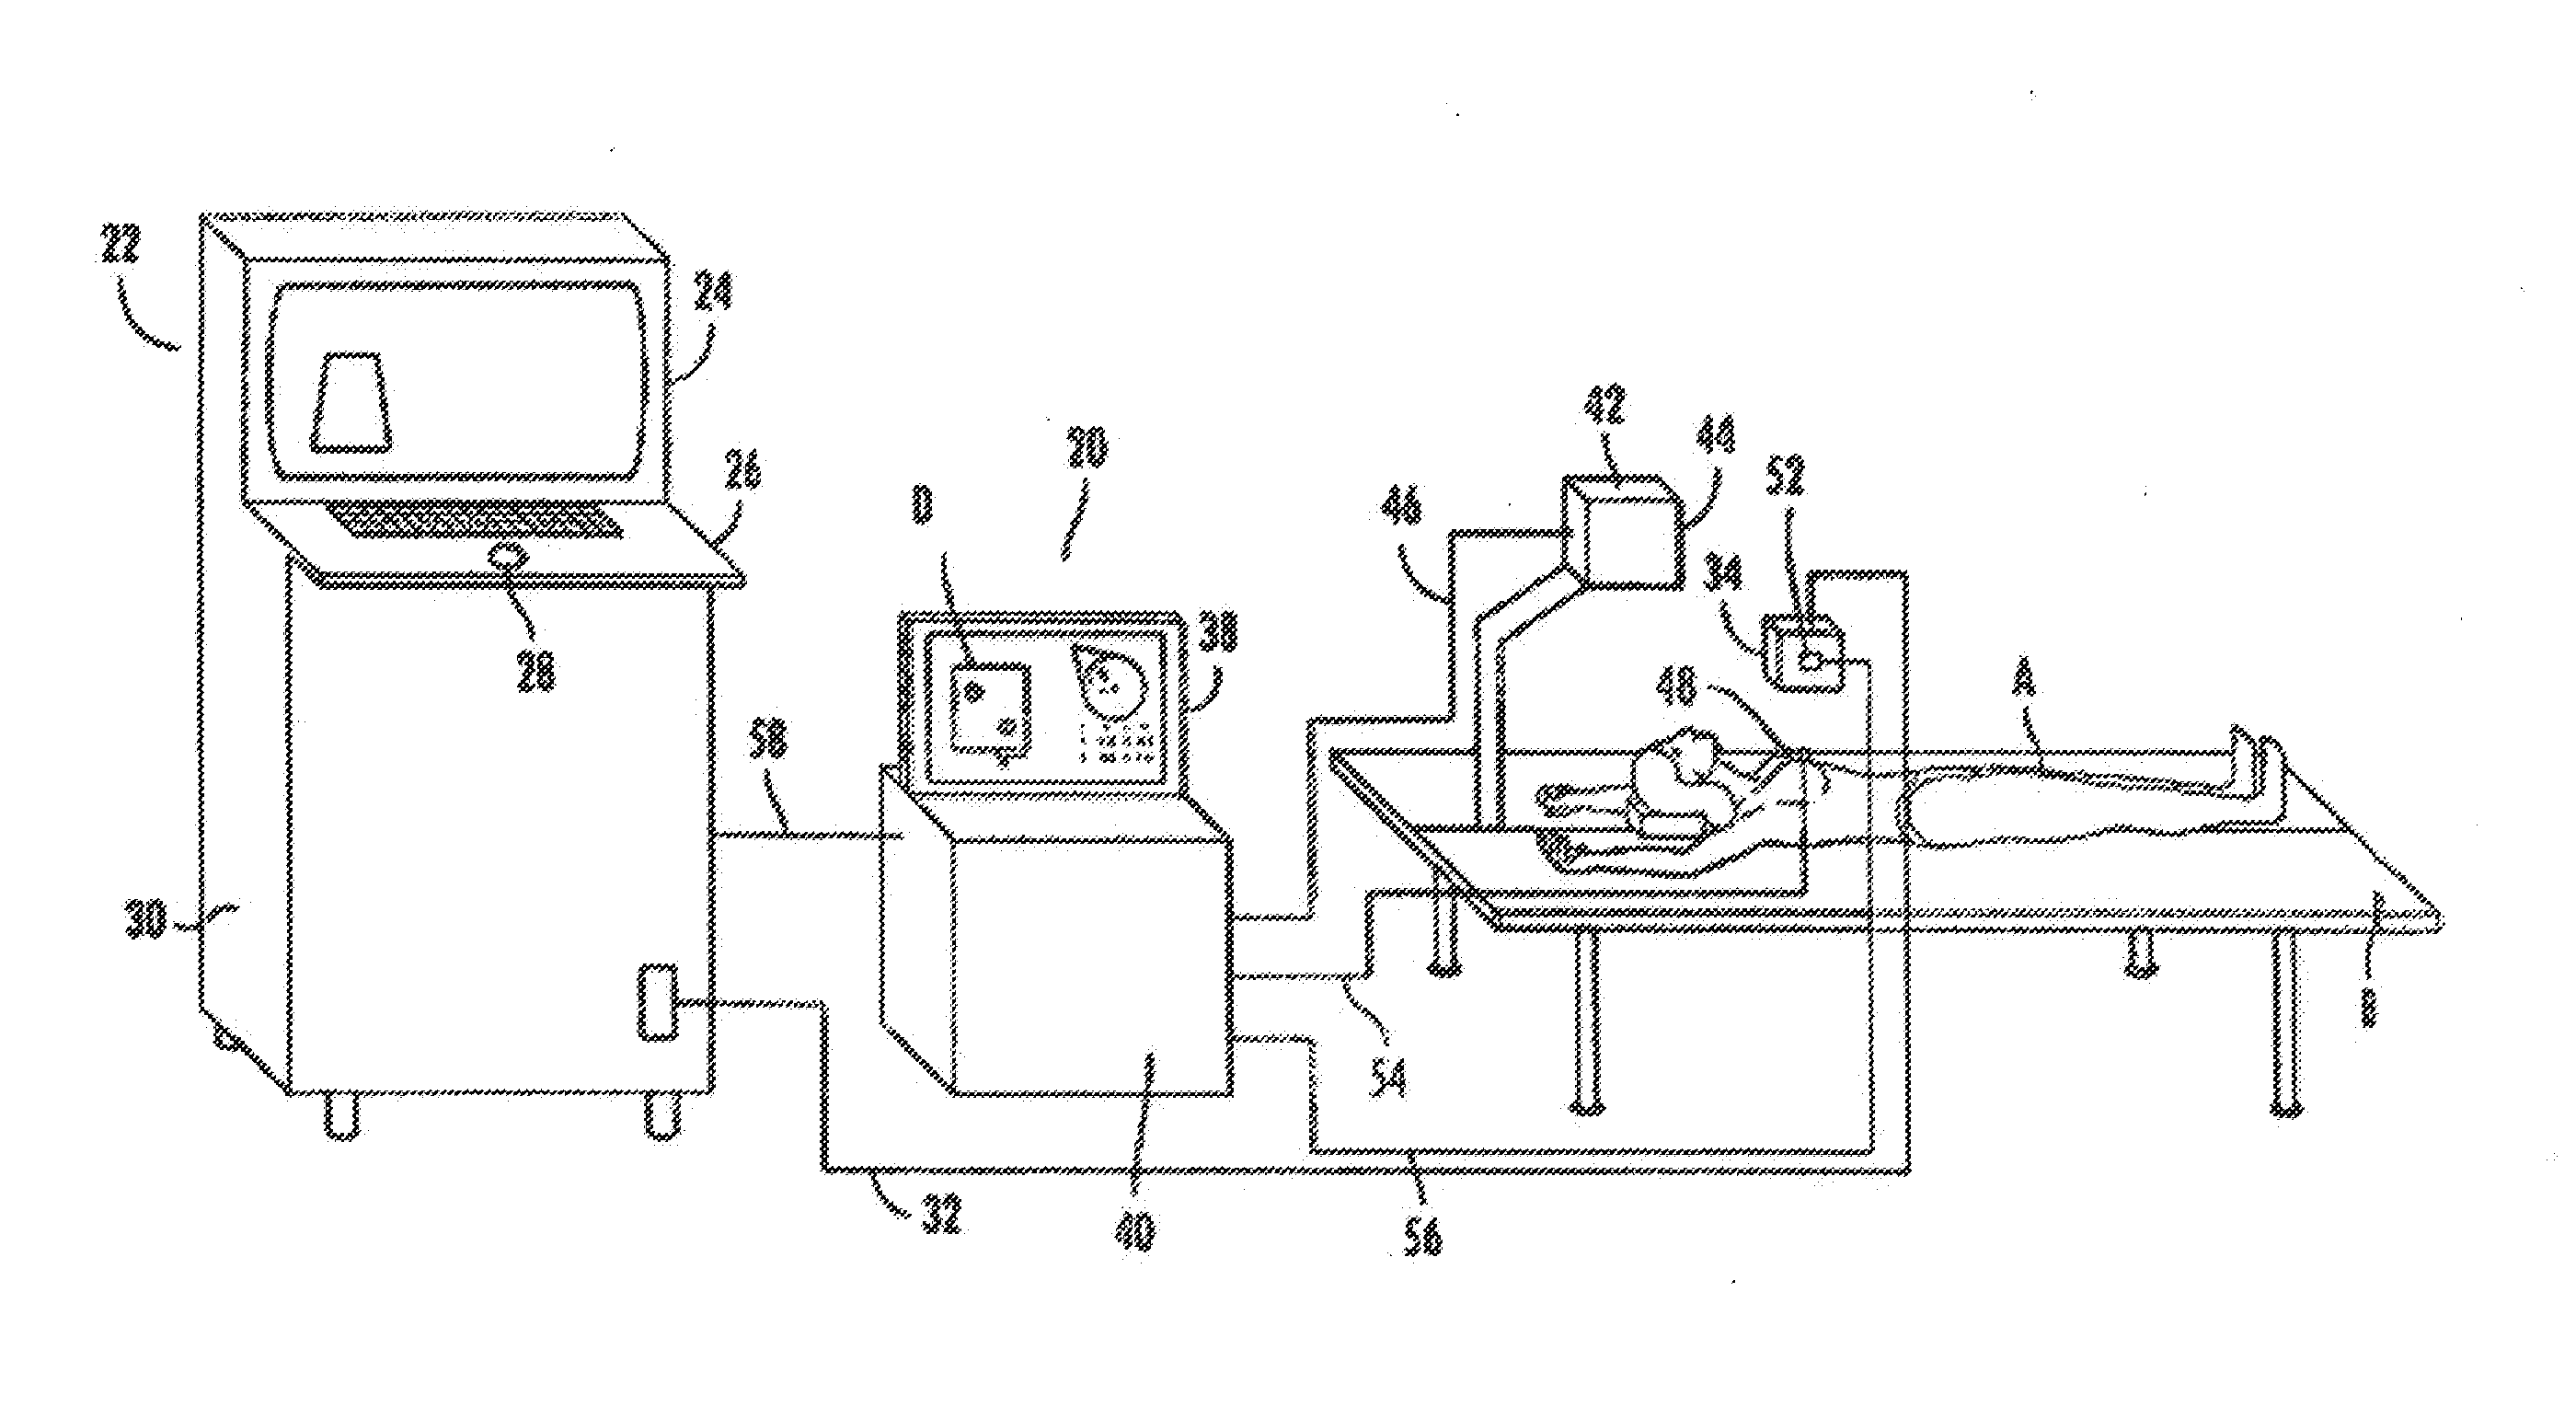 Three dimensional mapping display system for diagnostic ultrasound machines and method